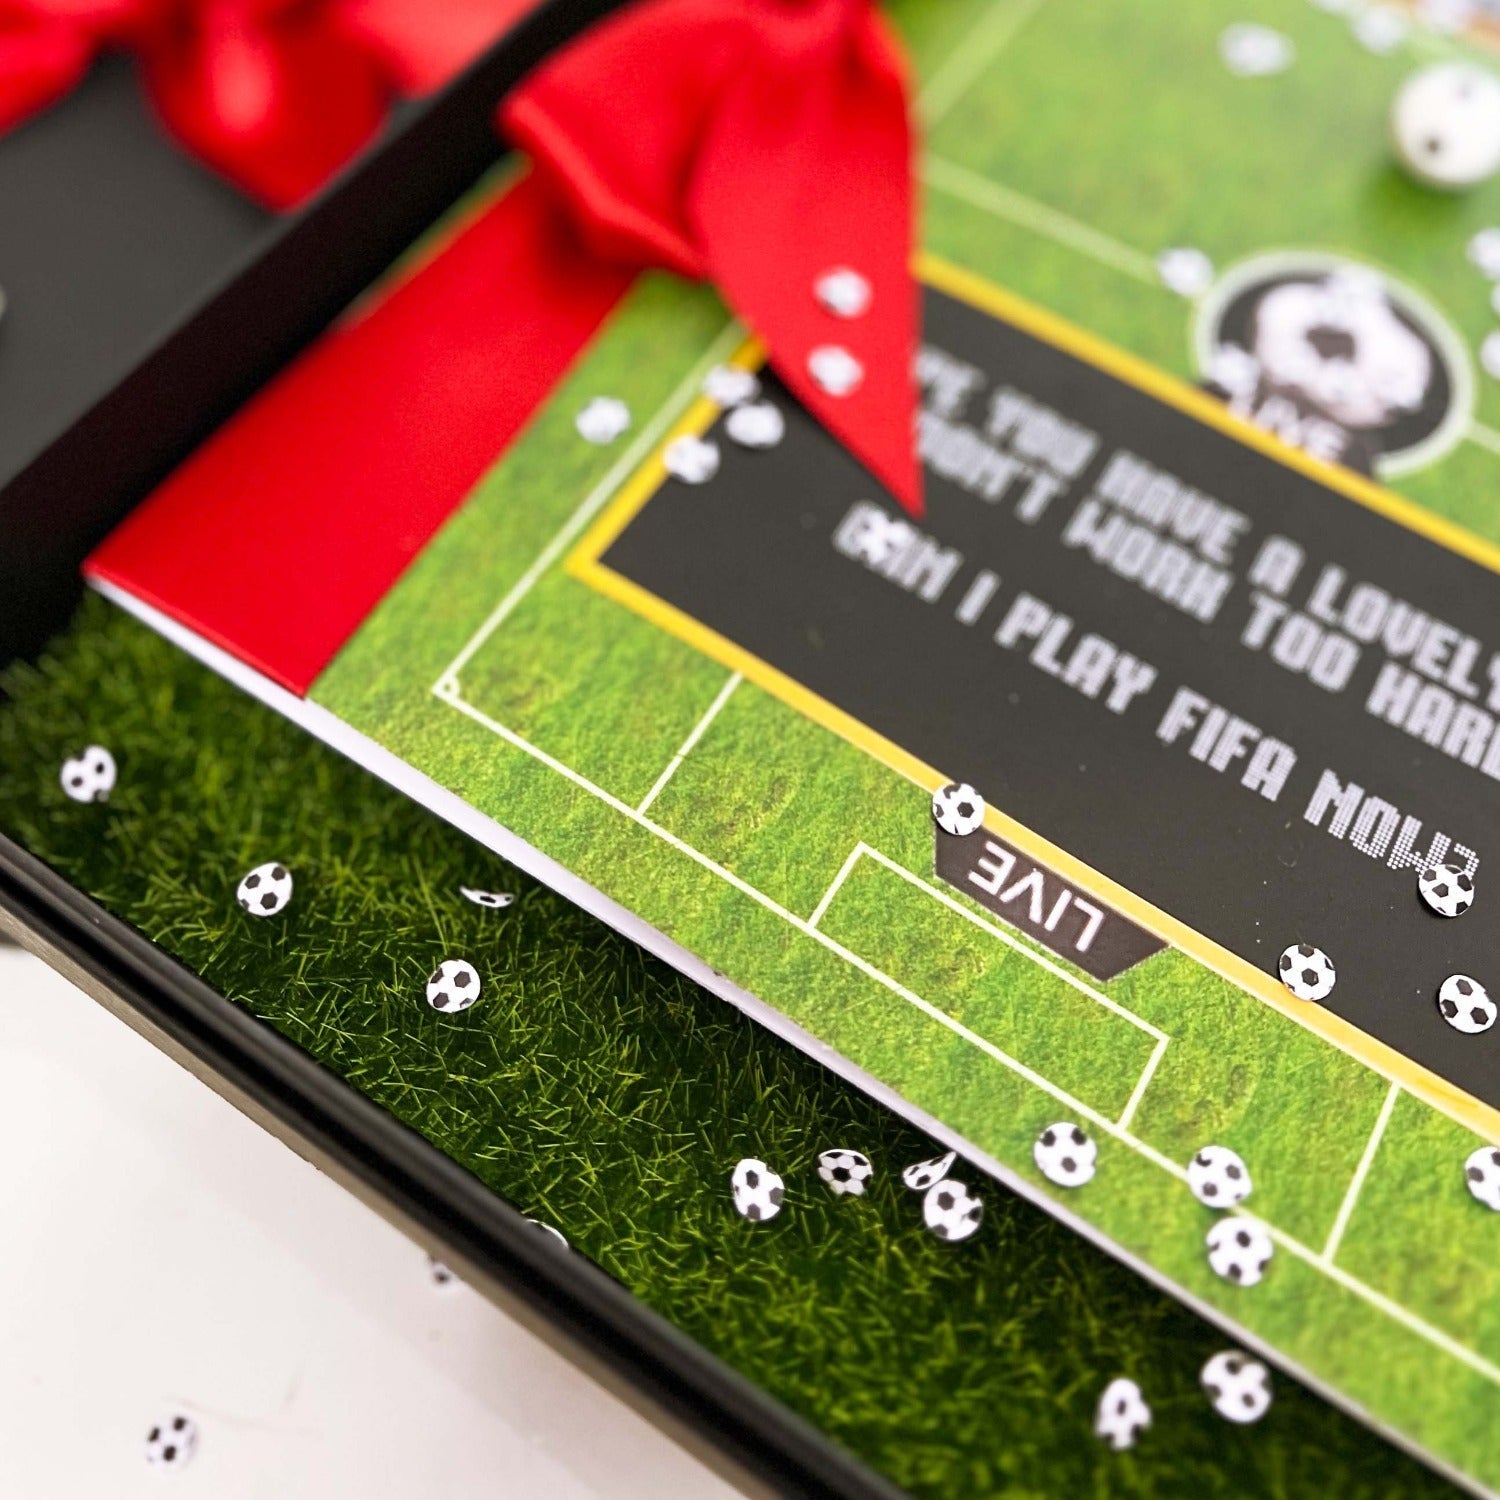 40th Brother Birthday Card Design the ultimate birthday card for the ultimate football fan